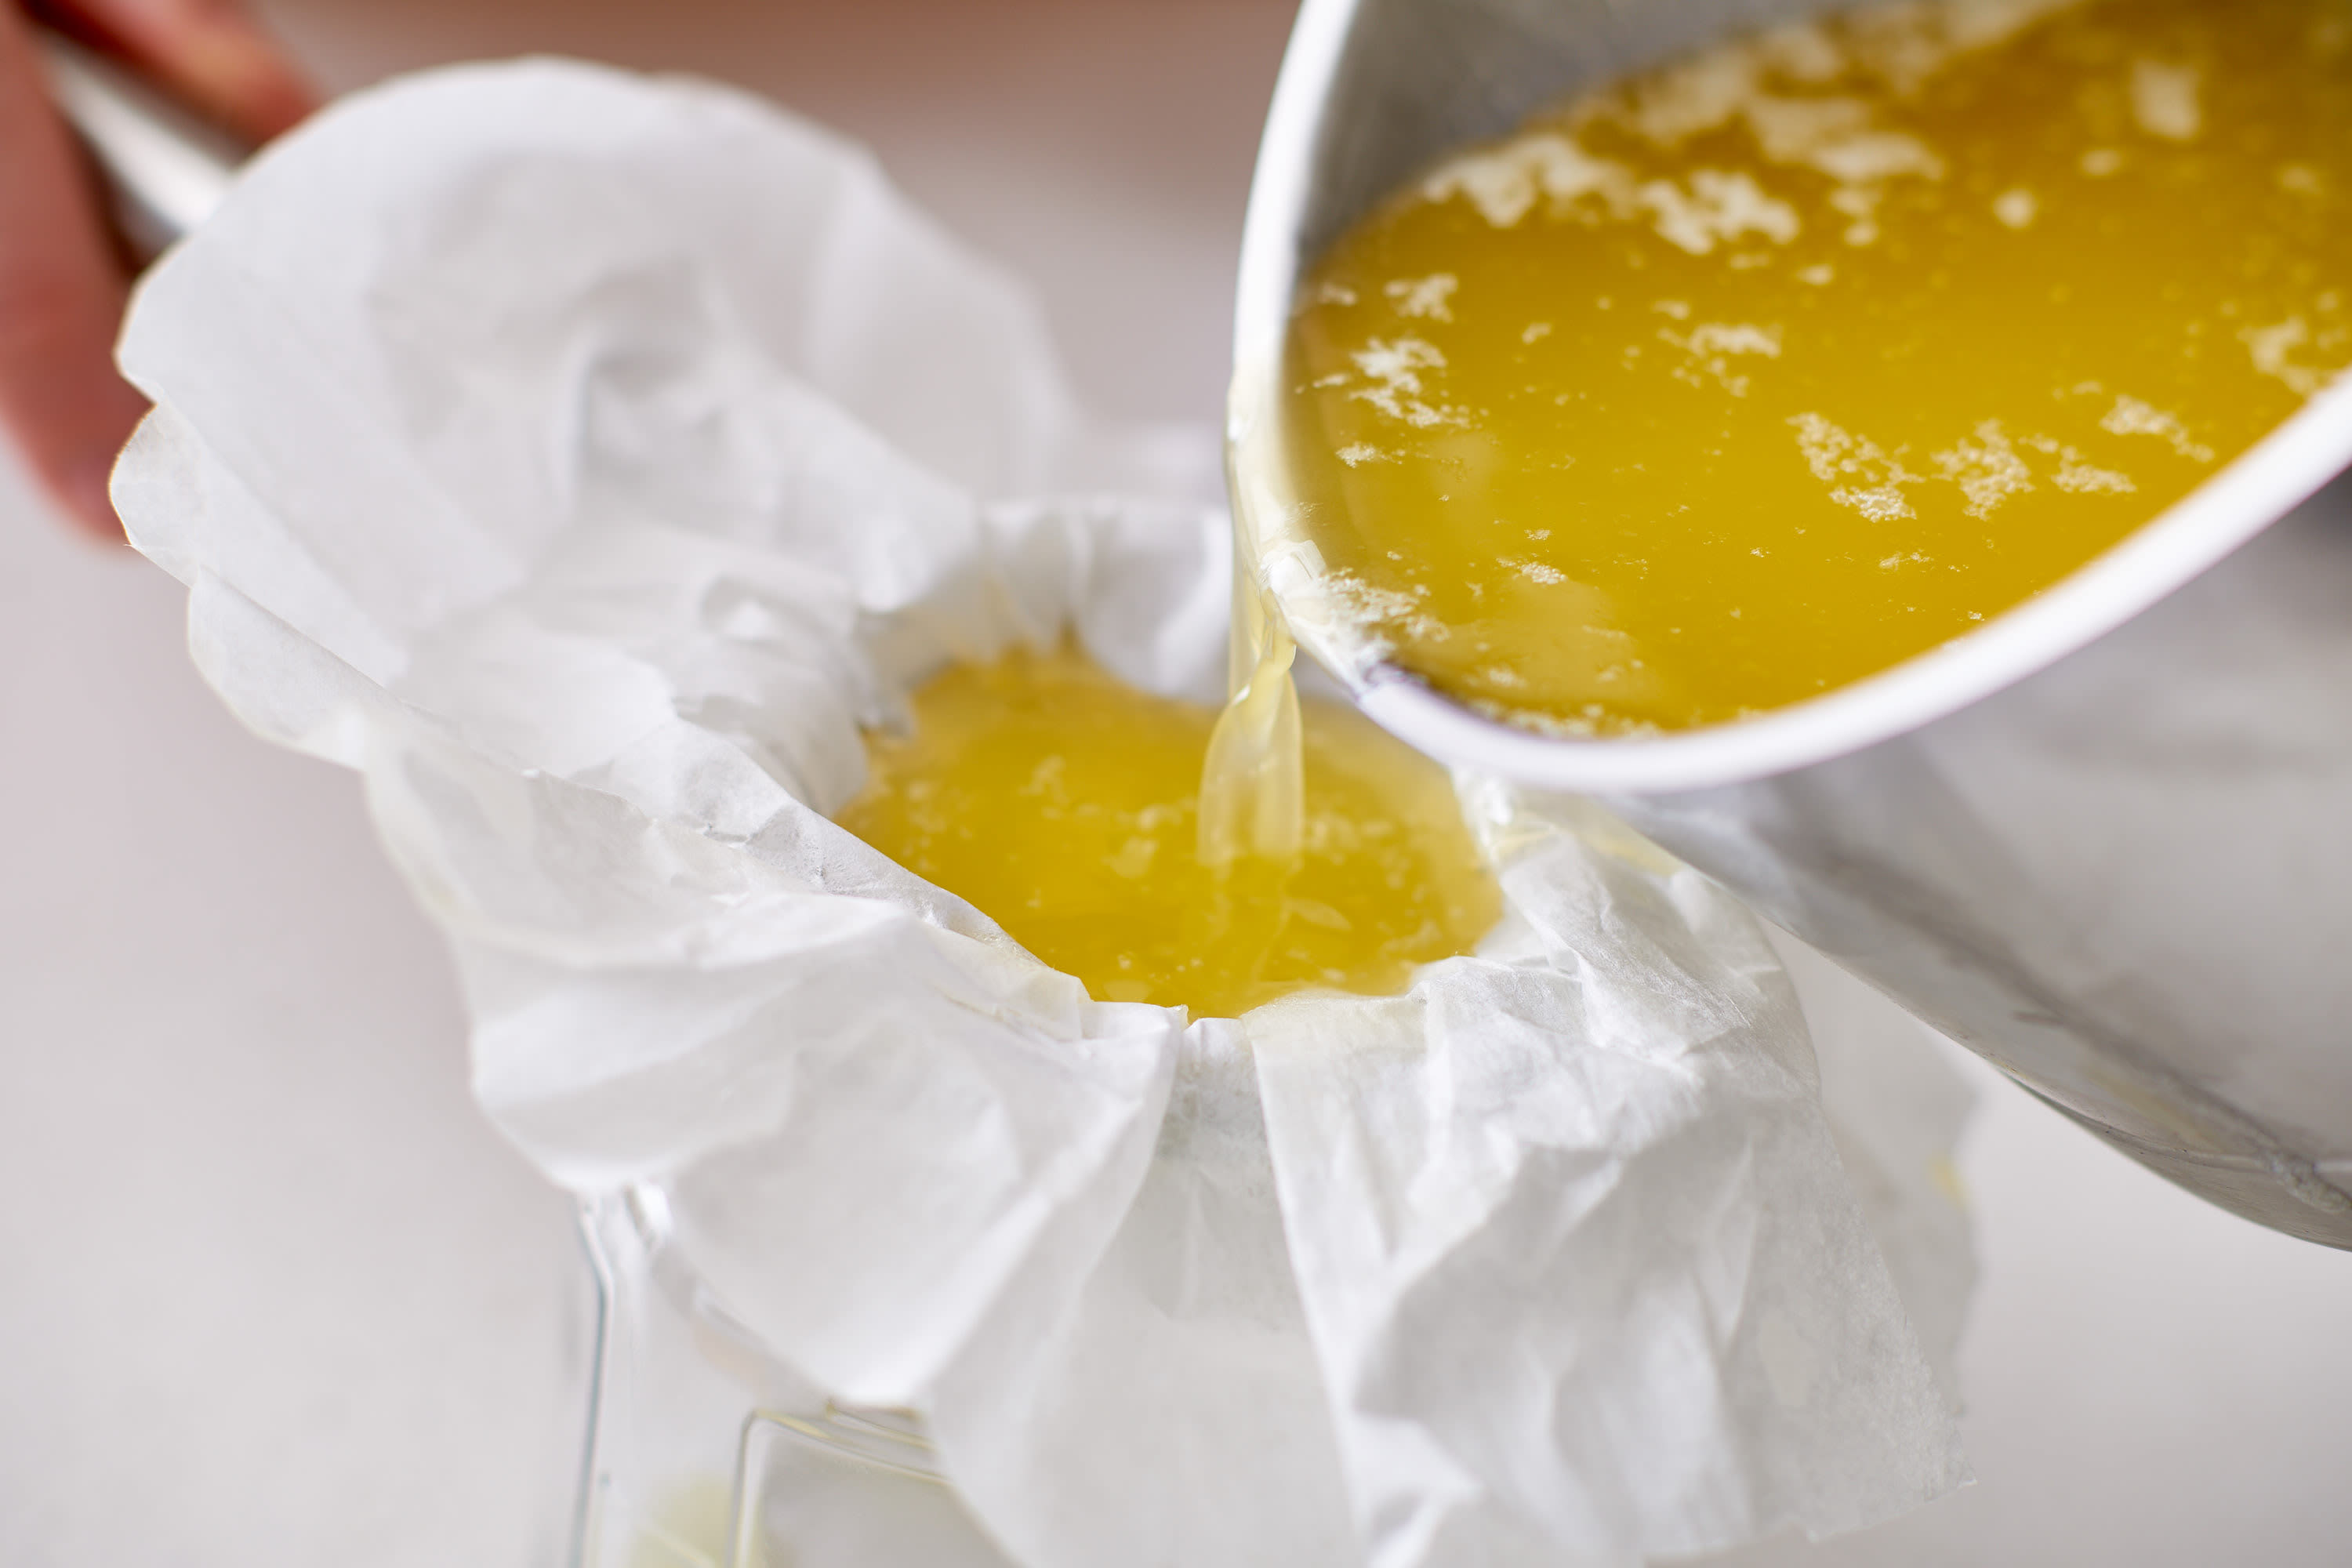 How to make clarified butter - The Bake School